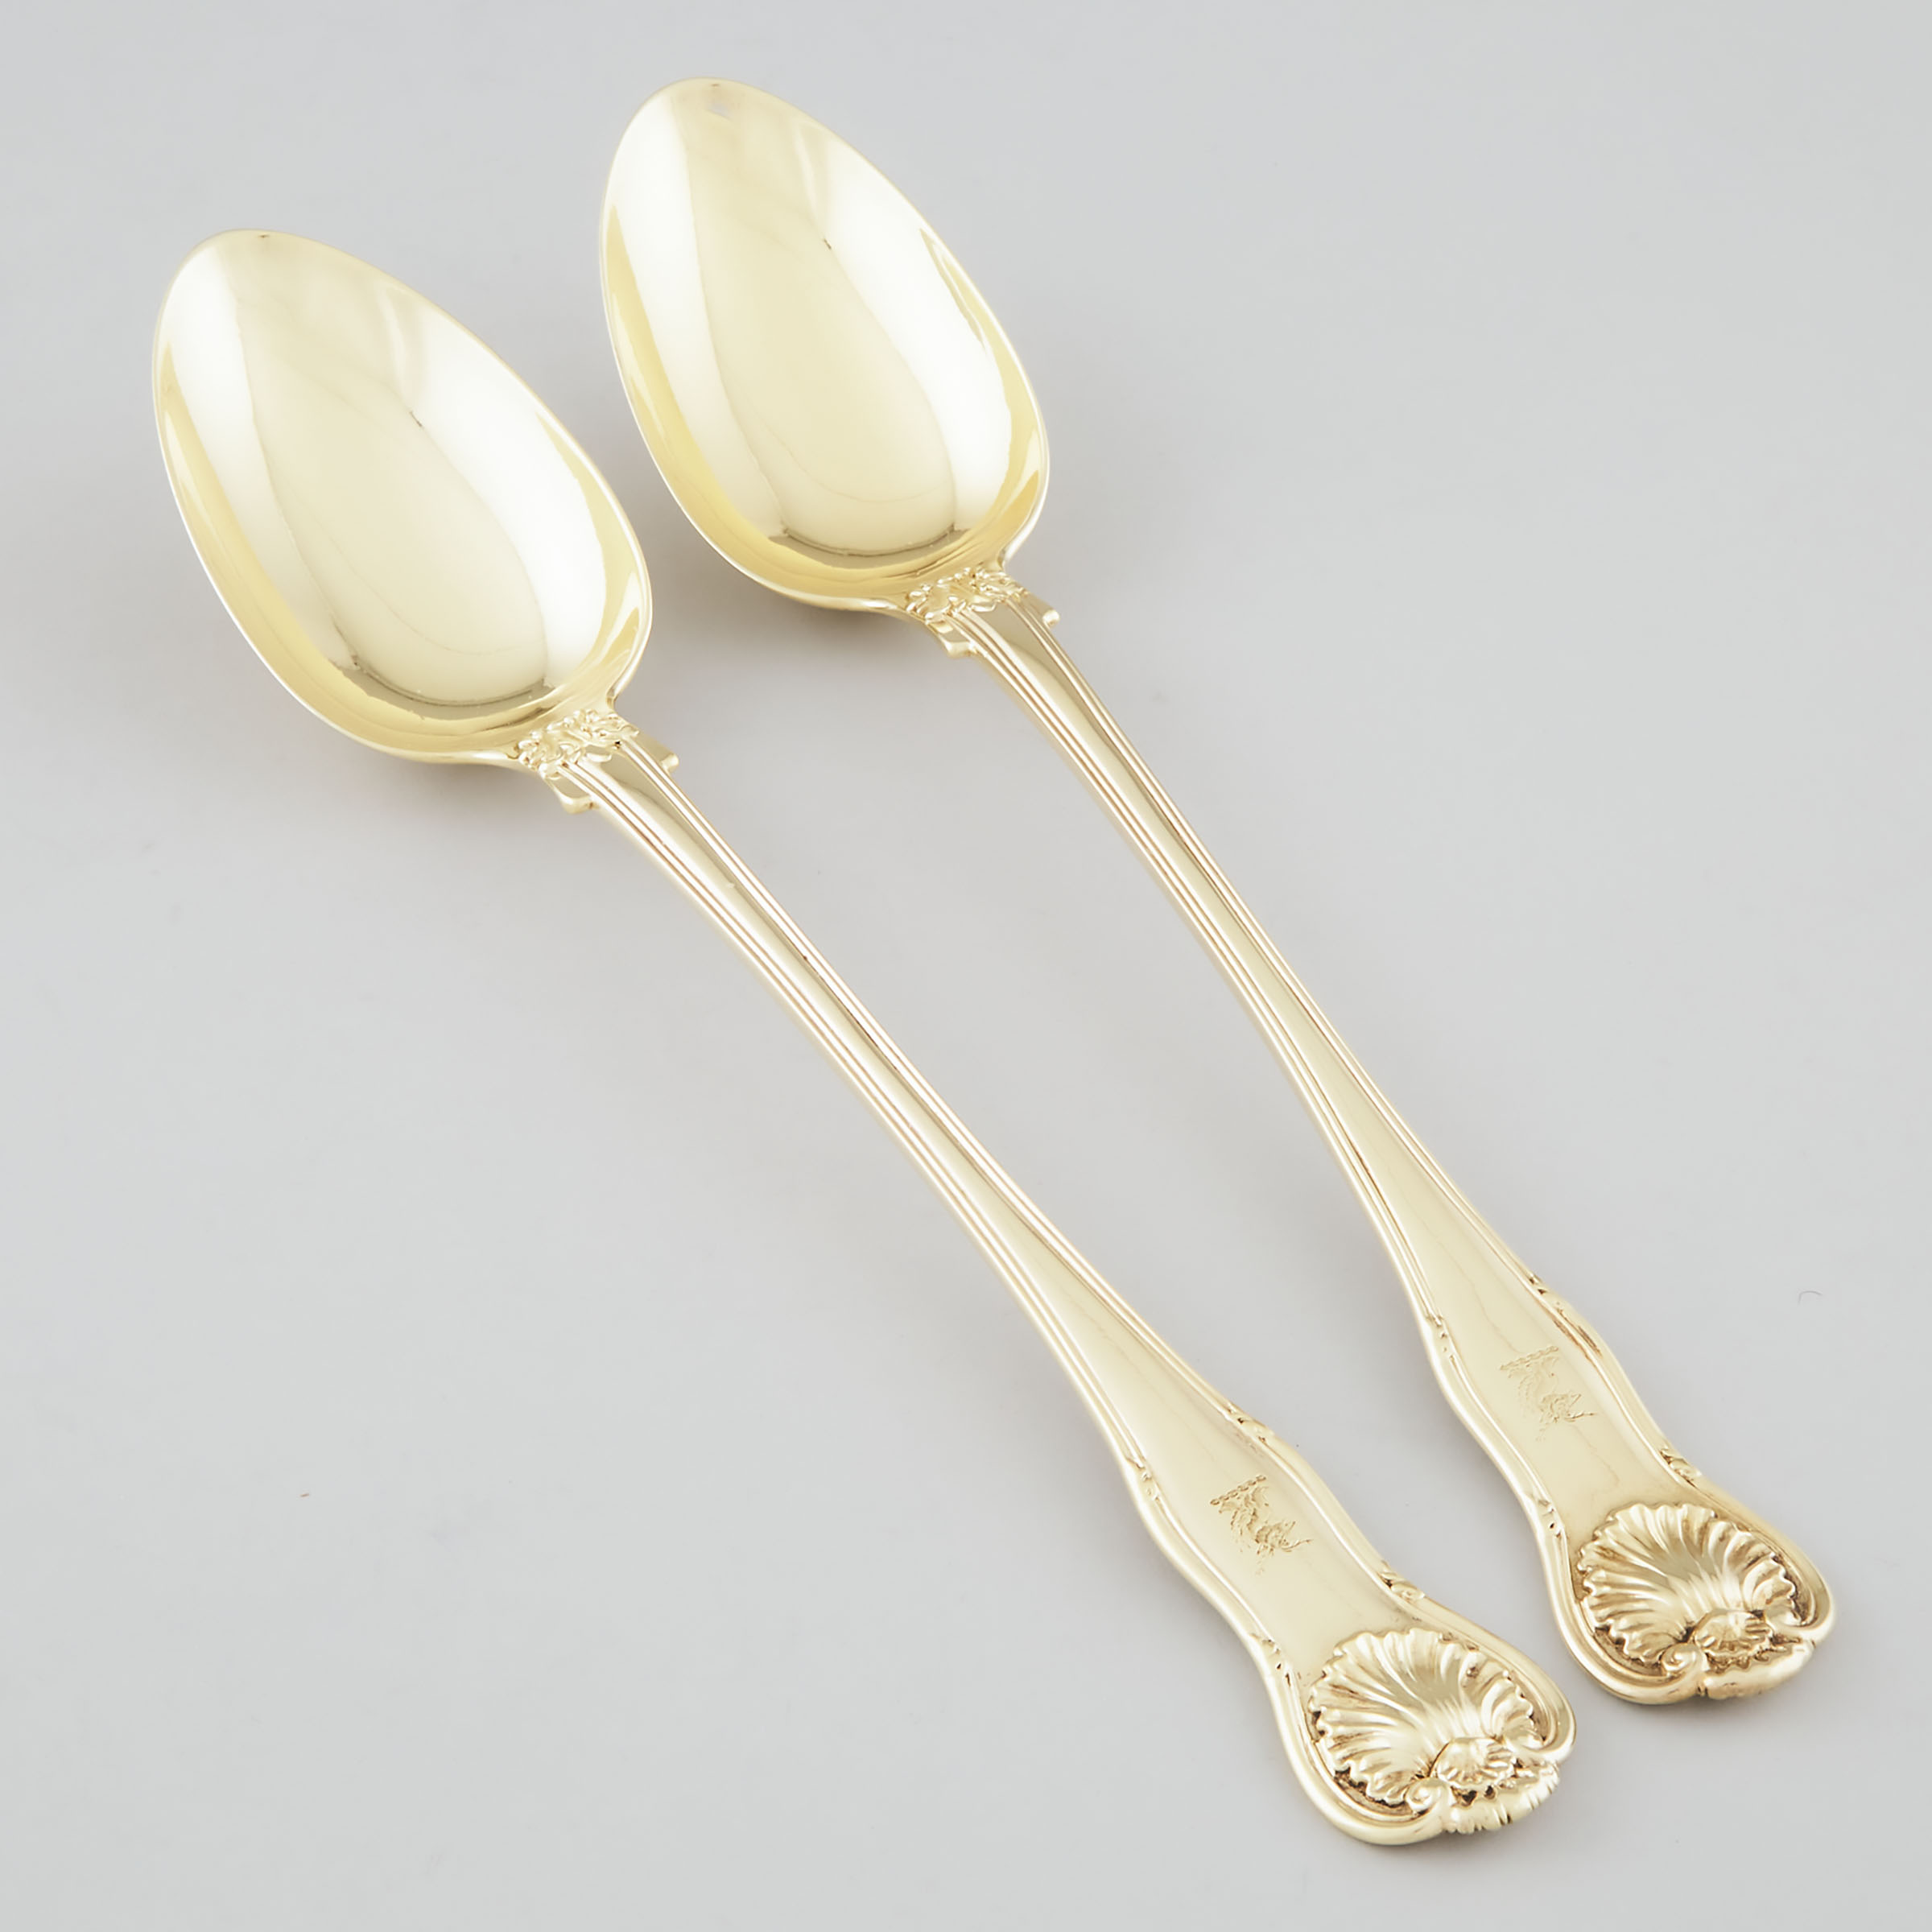 Pair of George IV Silver-Gilt King's